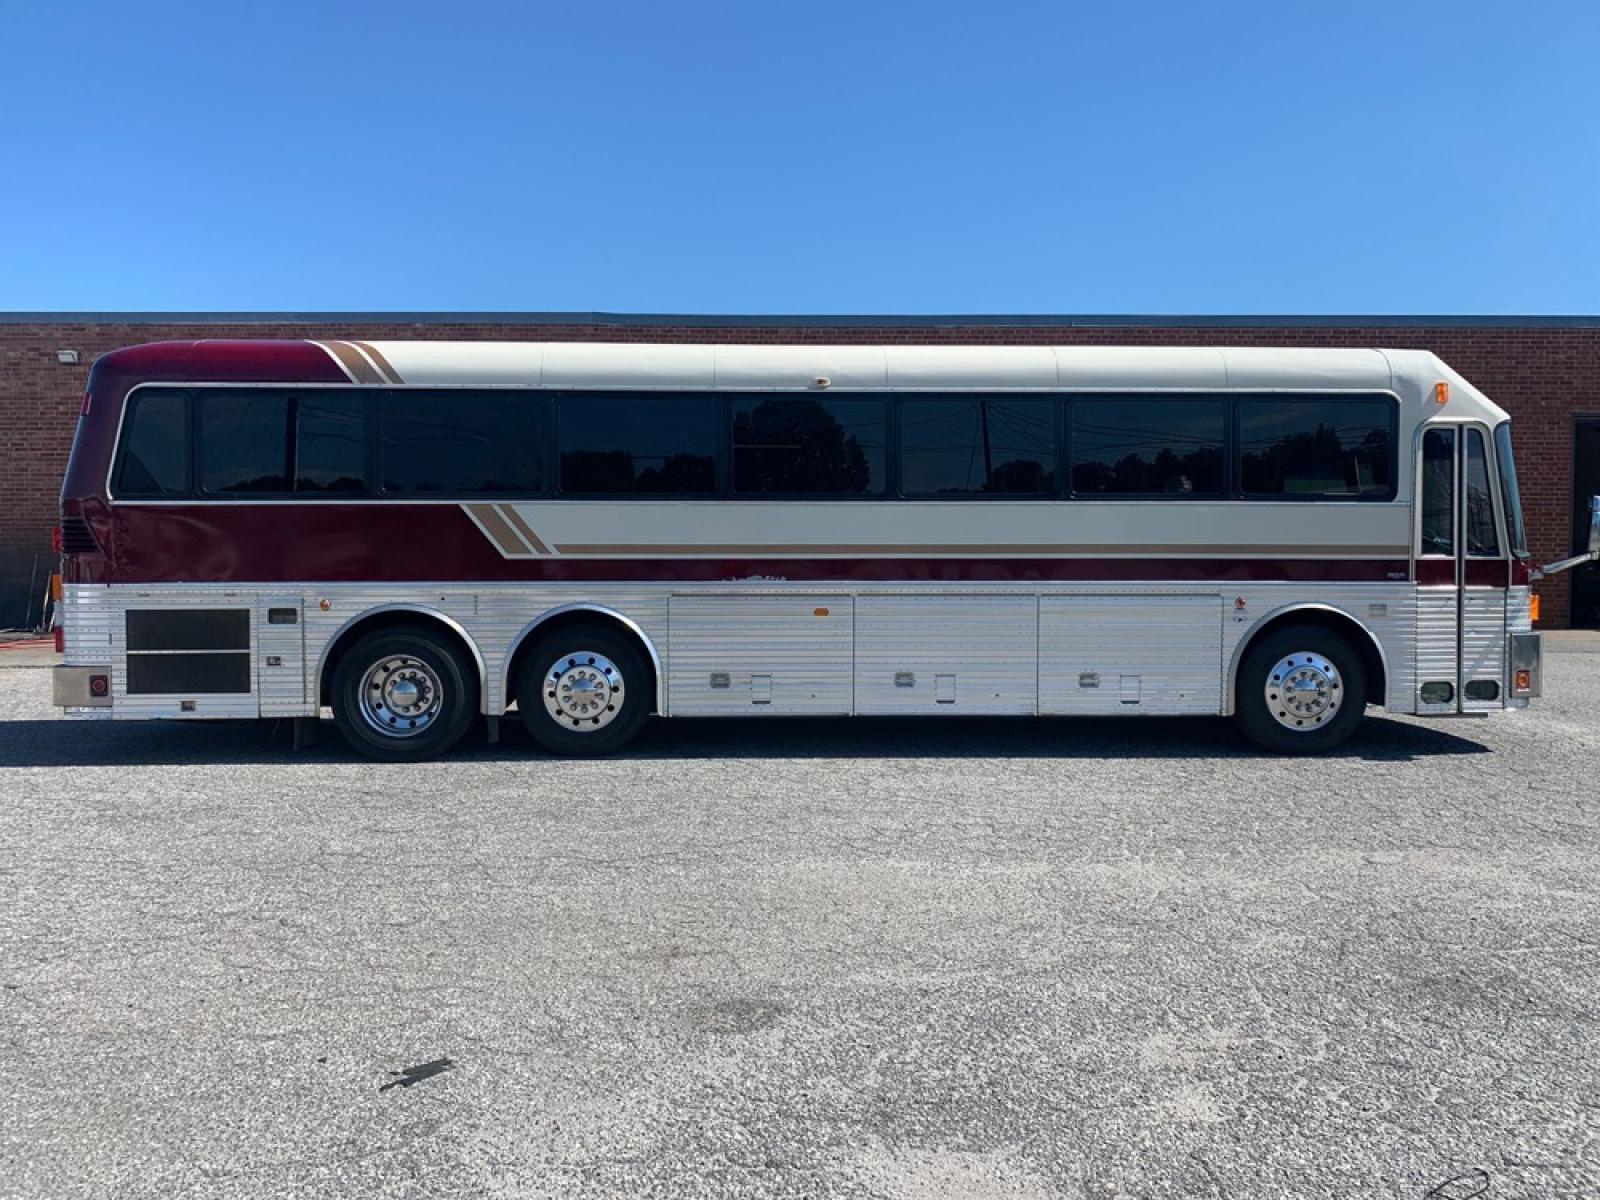 1996 White Eagle 15 Series with an Detroit Diesel Series 60 engine, Allison transmission, 0.000000, 0.000000 - 1996 EAGLE 15 Series 40’- 60 Detroit Diesel Engine, - Allison Automatic Transmission - 46 Passengers - Electric Wipers - Electric Mirrors - Alloy Wheels - 4 Monitors & DVD - Enclosed Overhead Racks – Restroom - Photo #1